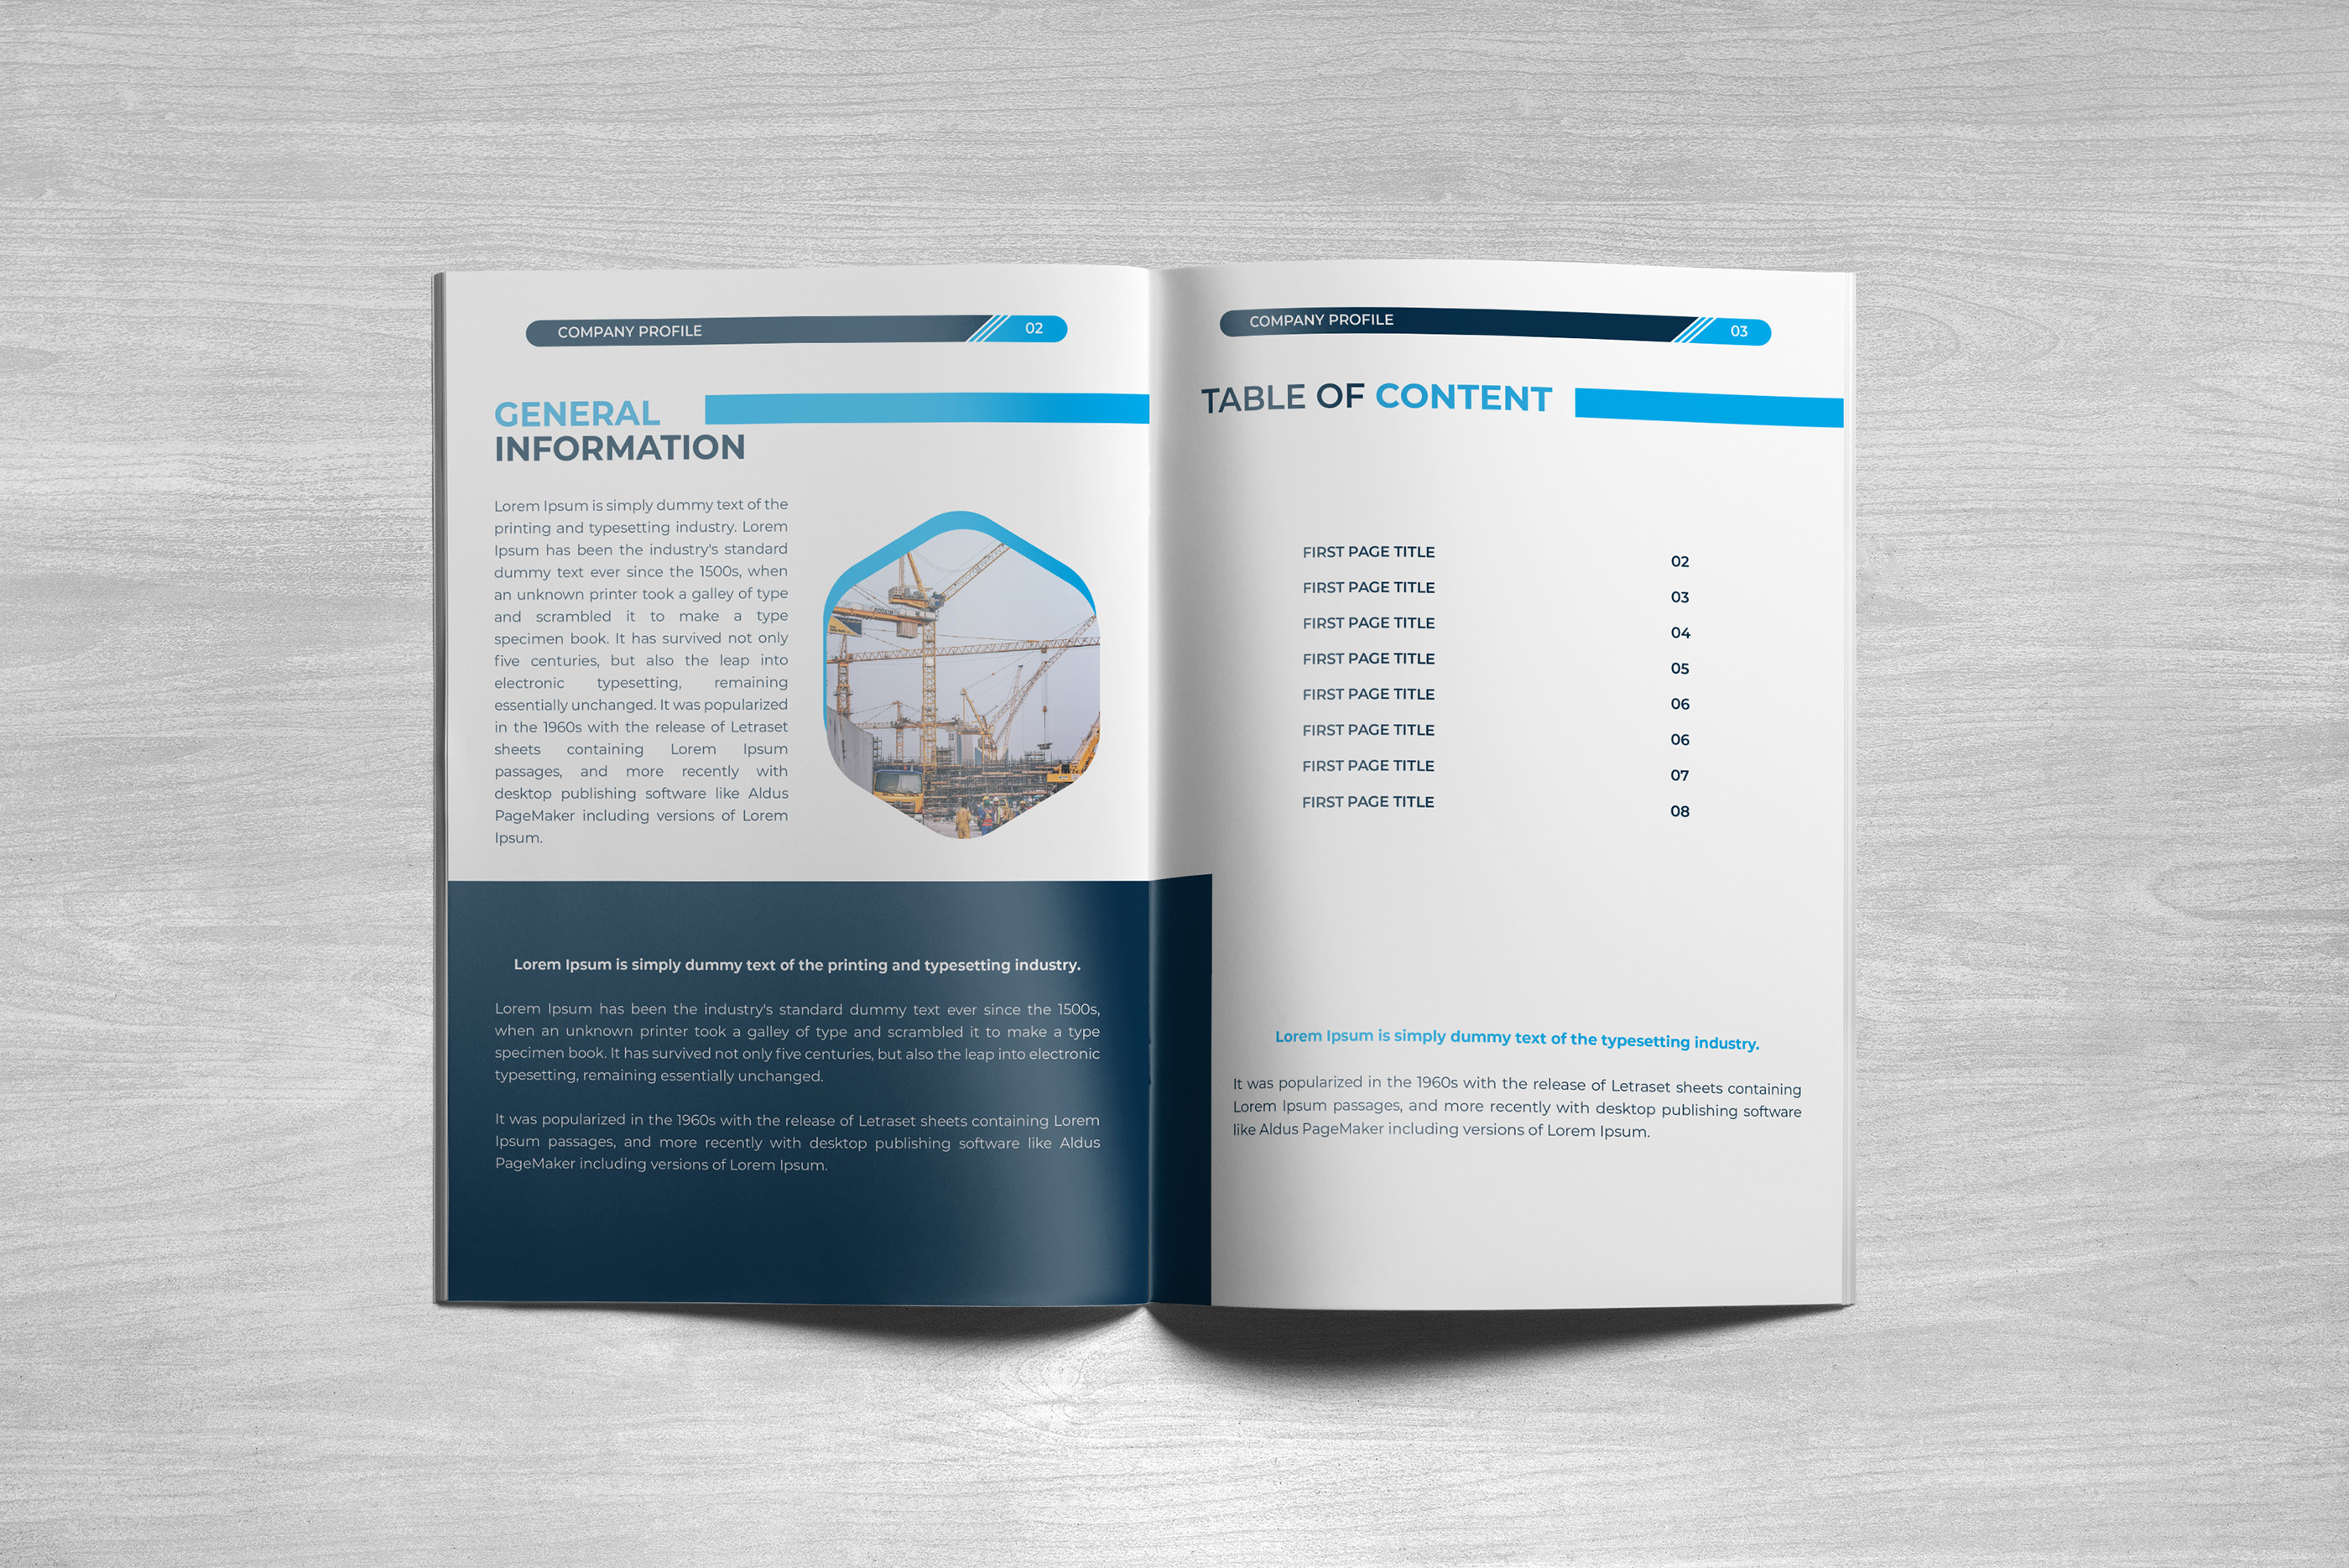 Construction Company Profile Free Template Download On Behance